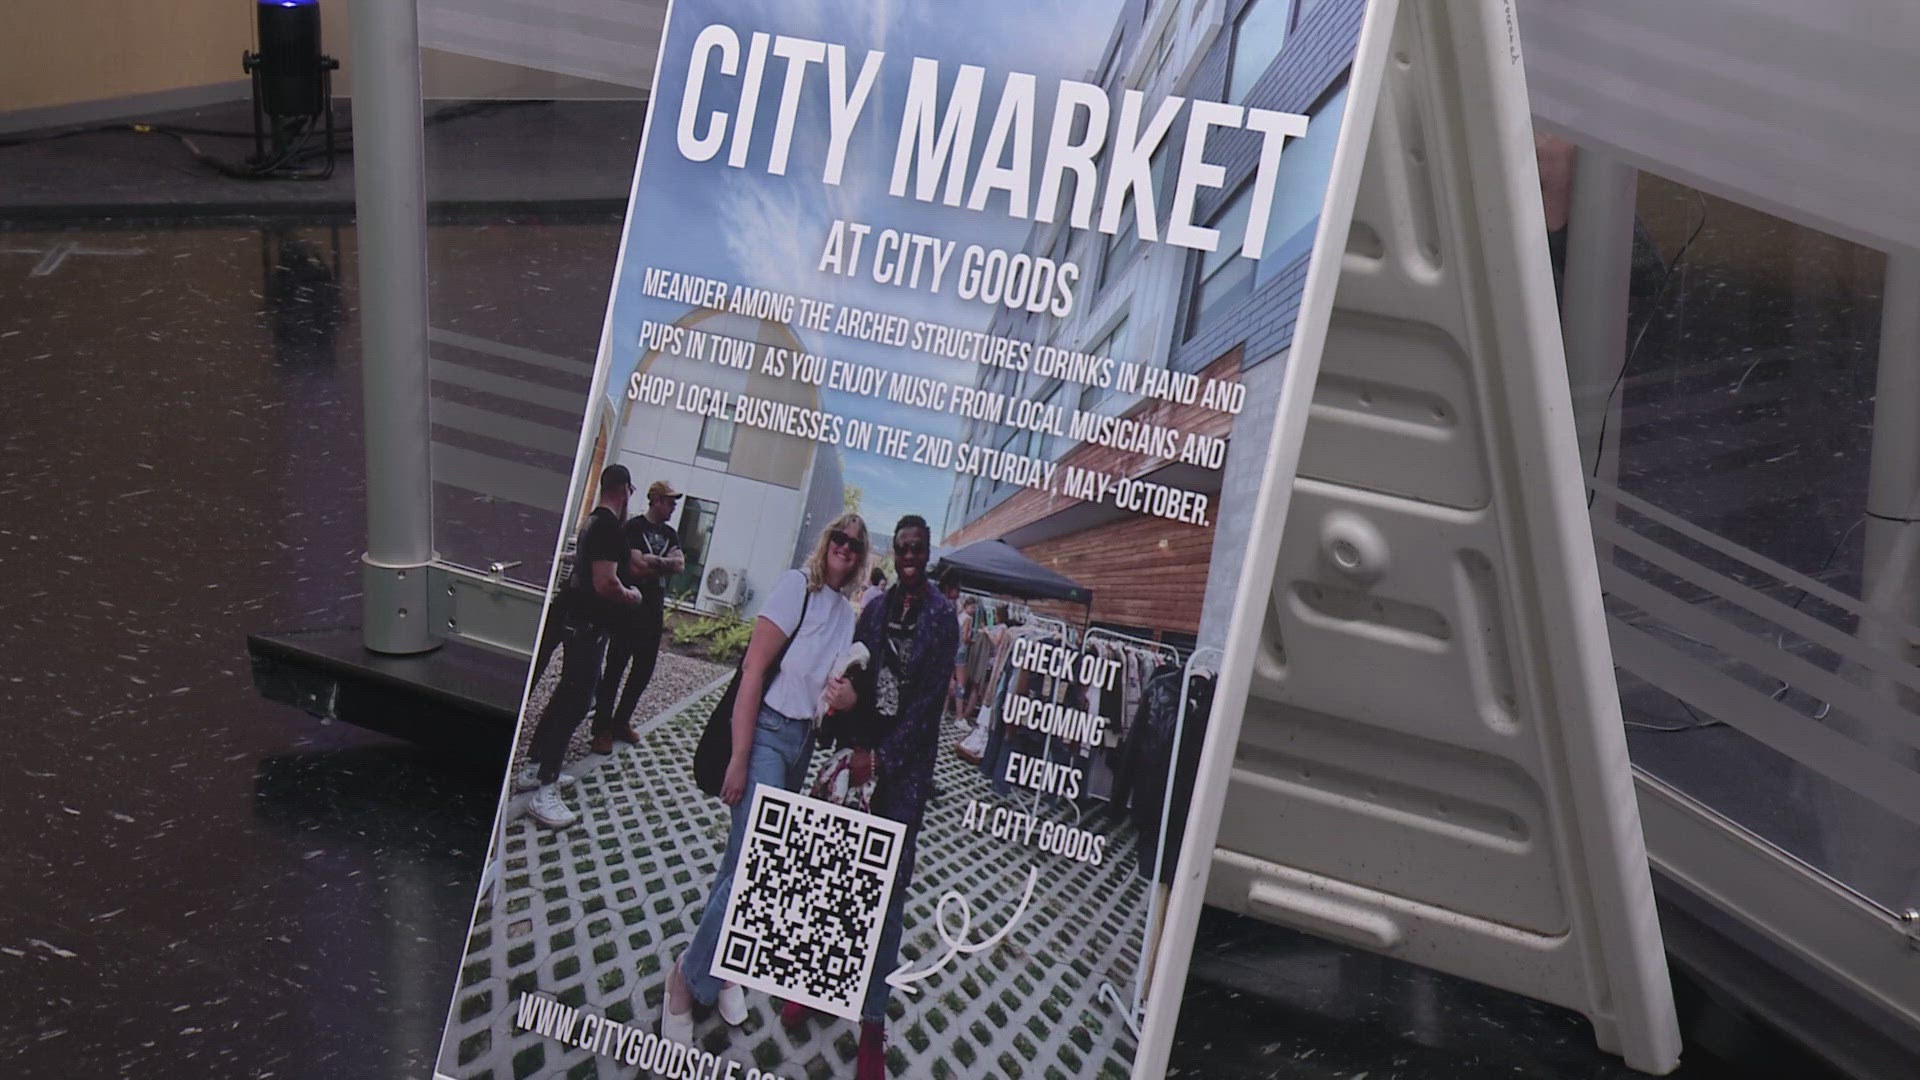 3News' Danielle Wiggins chats with City Goods co-founder and Director of Growth Liz Painter about City Market's return to City Goods in Ohio City.